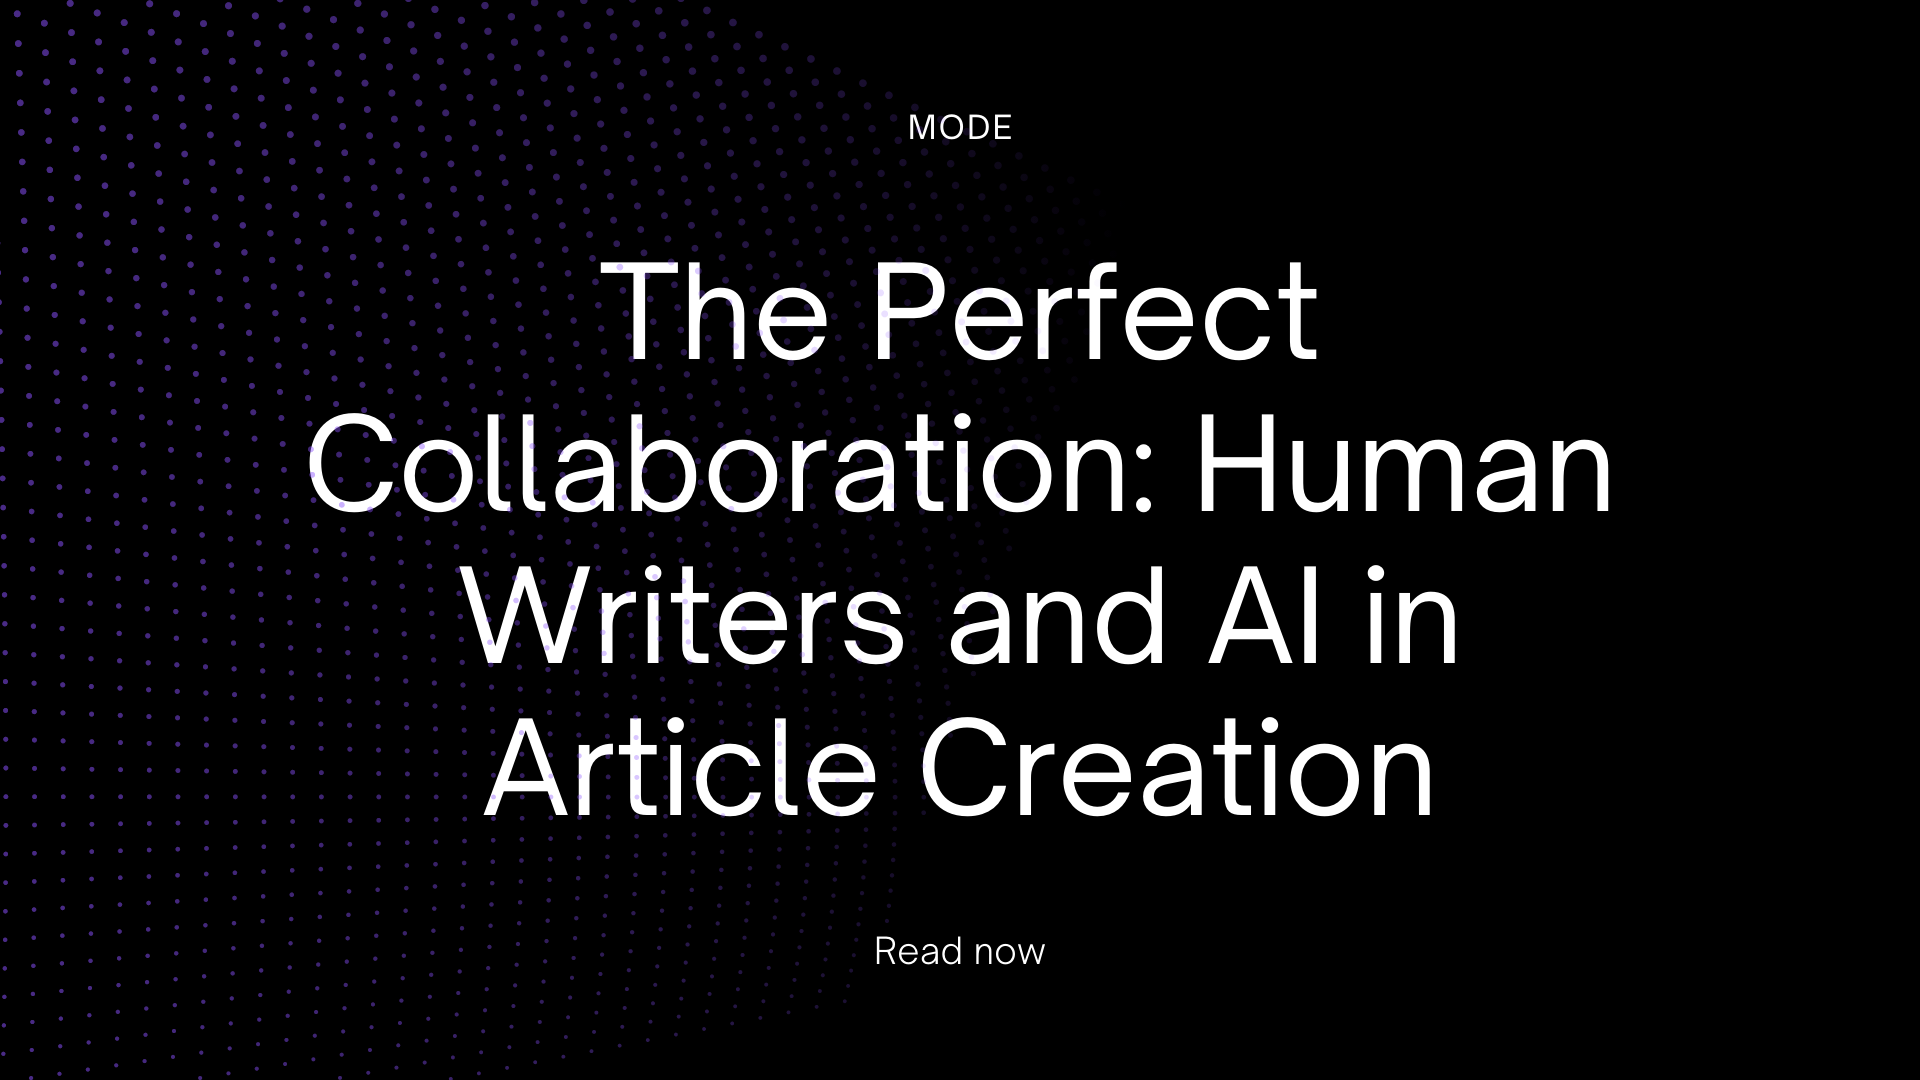 The Perfect Collaboration: Human Writers and AI in Article Creation